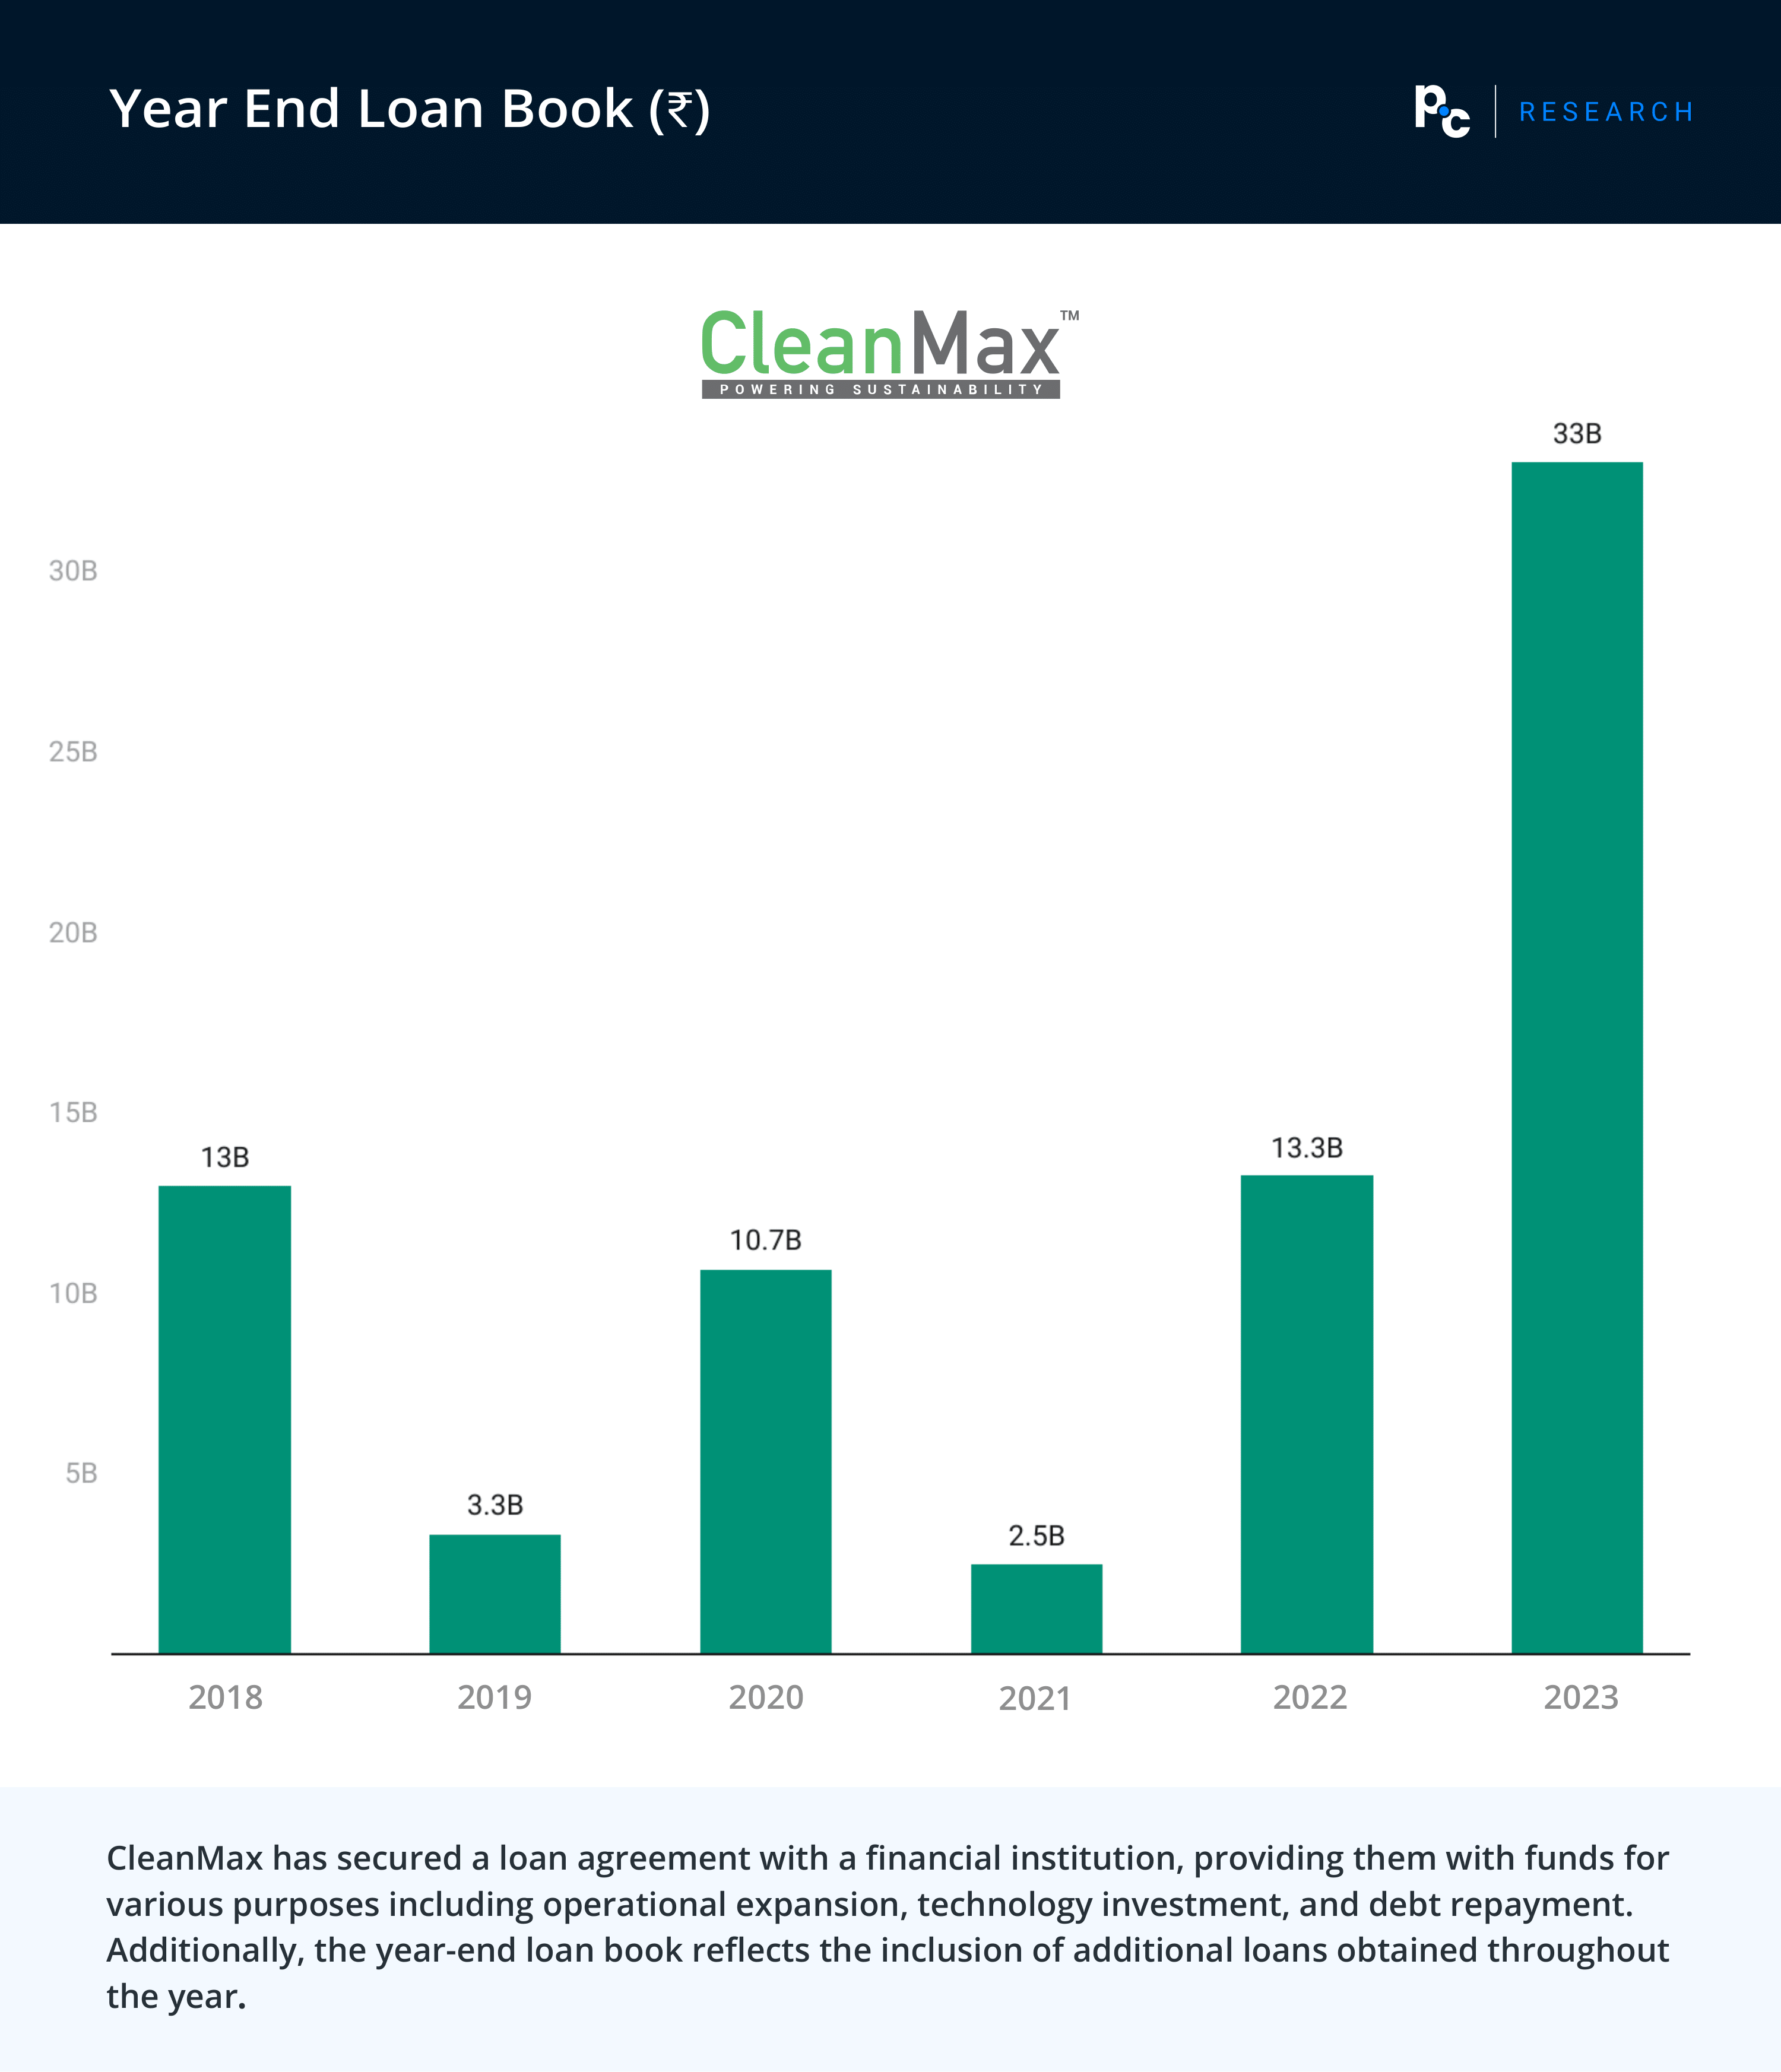 CleanMax: Year End Loan Book (₹).

CleanMax has secured a loan agreement with a financial institution, providing them with funds for various purposes including operational expansion, technology investment, and debt repayment. Additionally, the year-end loan book reflects the inclusion of additional loans obtained throughout the year.